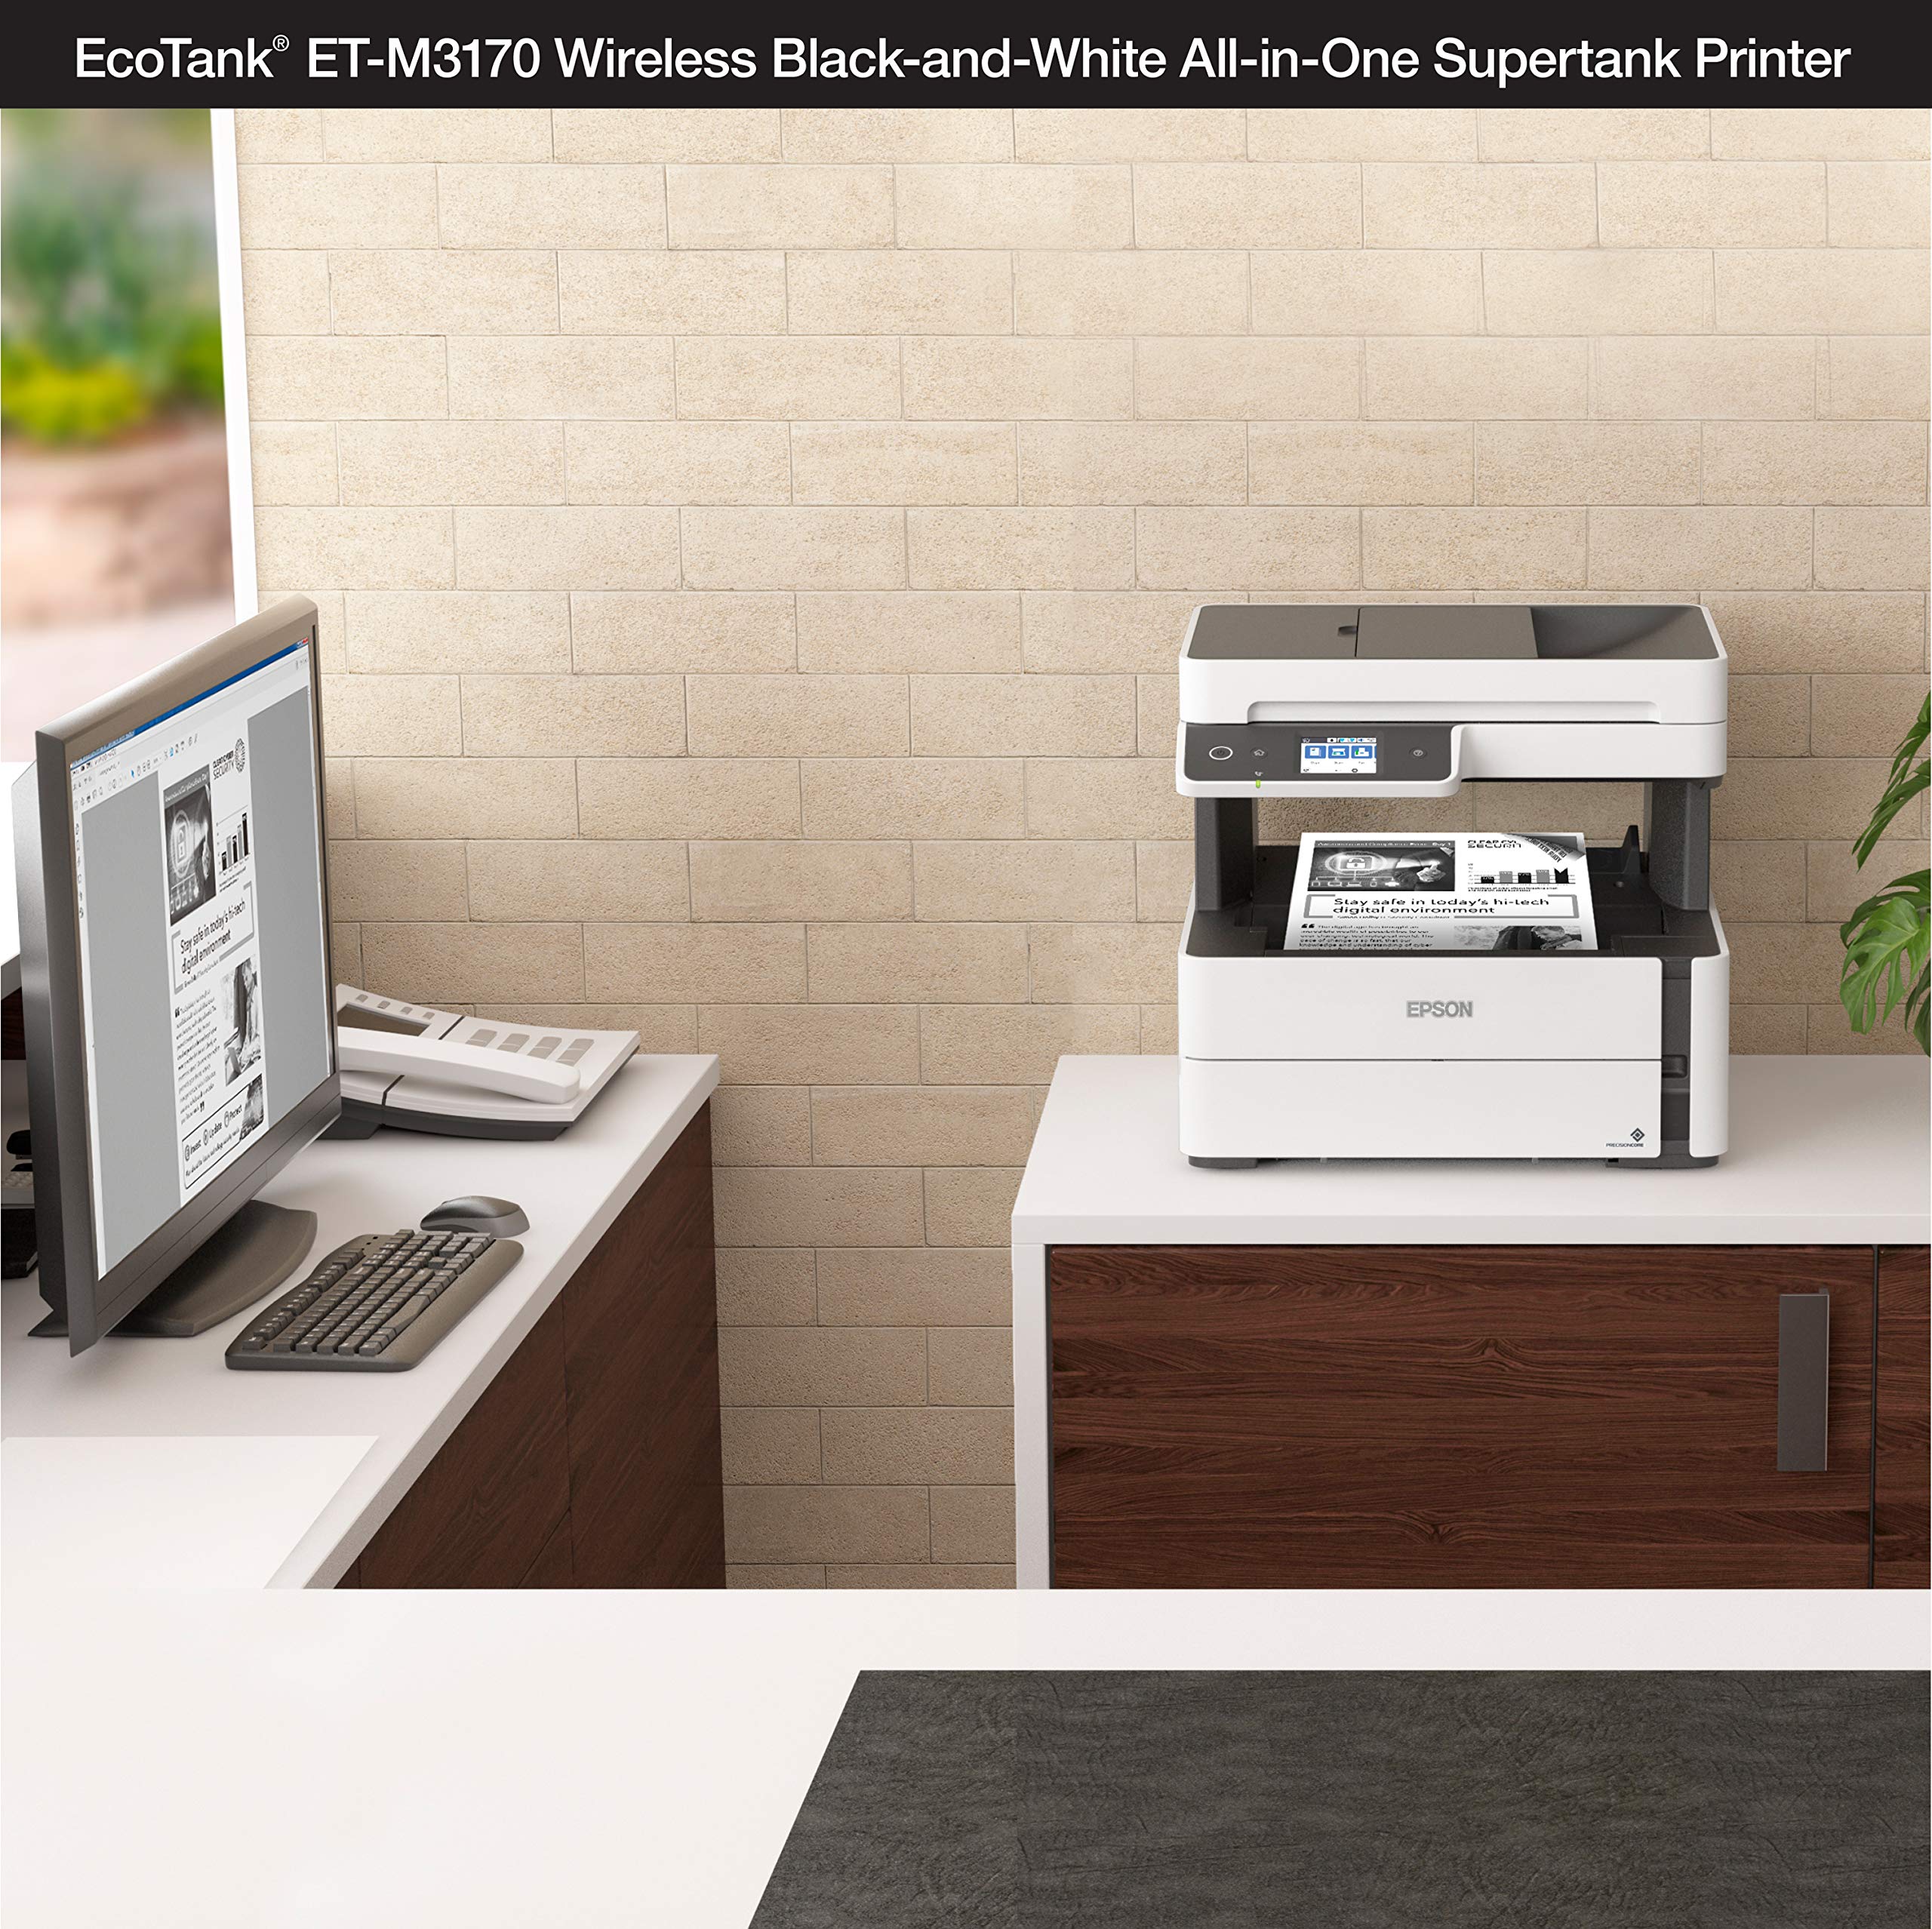 Epson EcoTank ET-M3170 Wireless Monochrome All-in-One Supertank Printer with ADF, Fax and Ethernet PLUS 2 Years of Unlimited Ink*